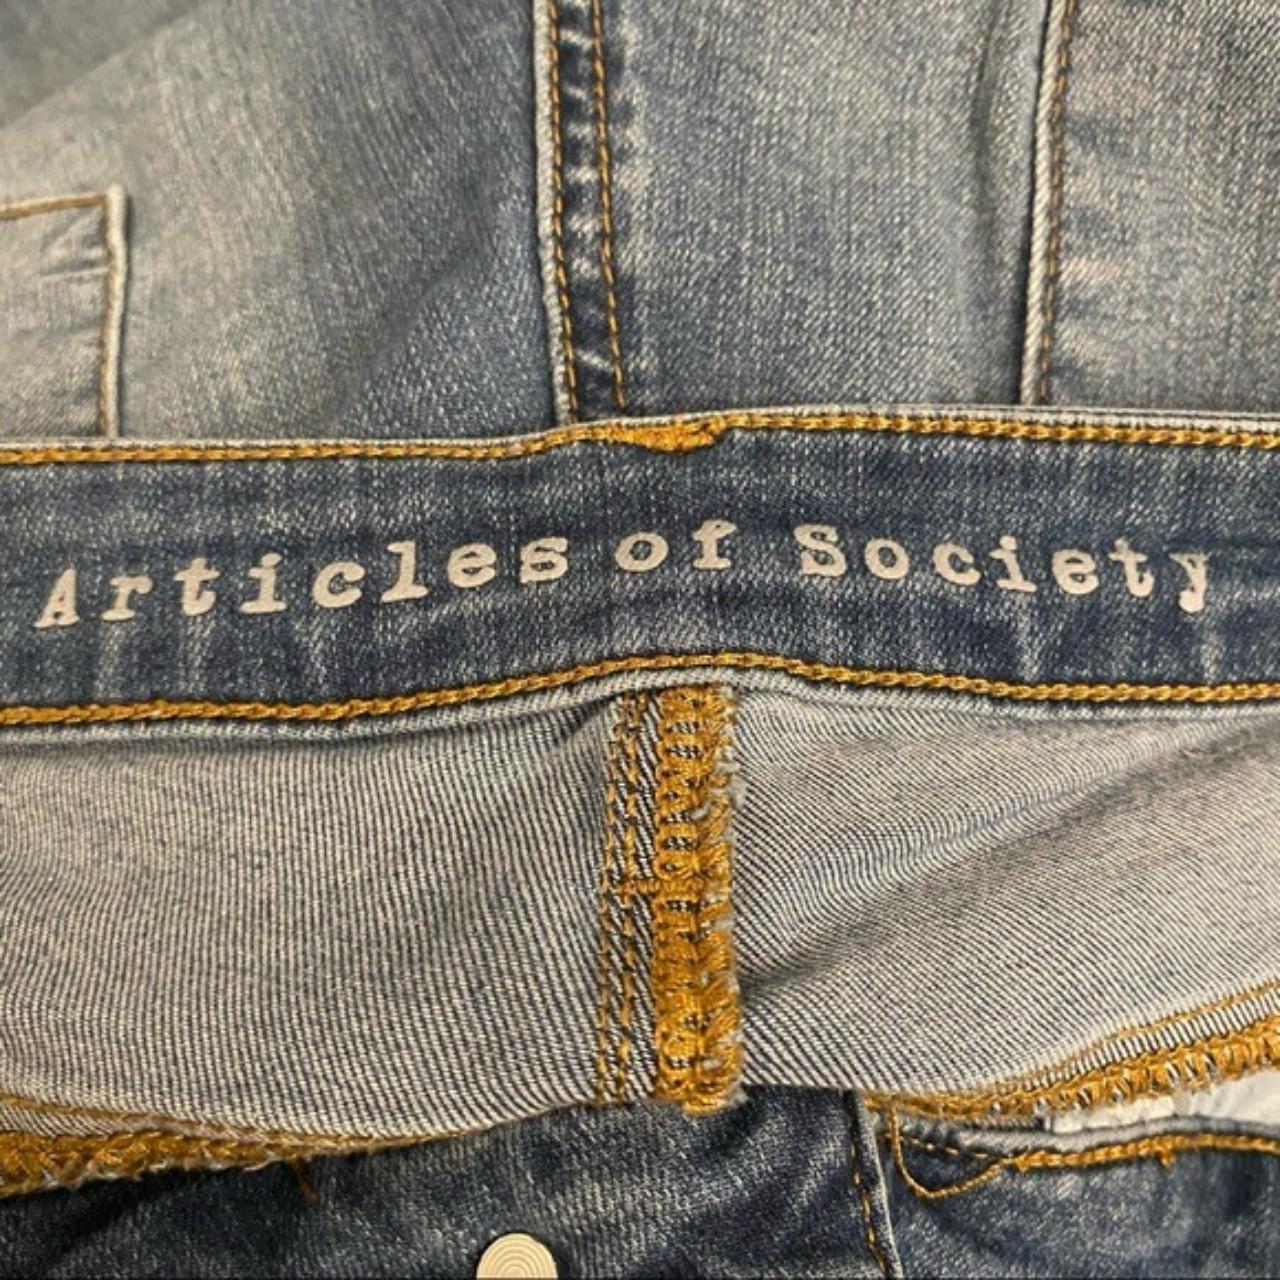 Product Image 3 - Brand: Articles of Society
Features: Skinny